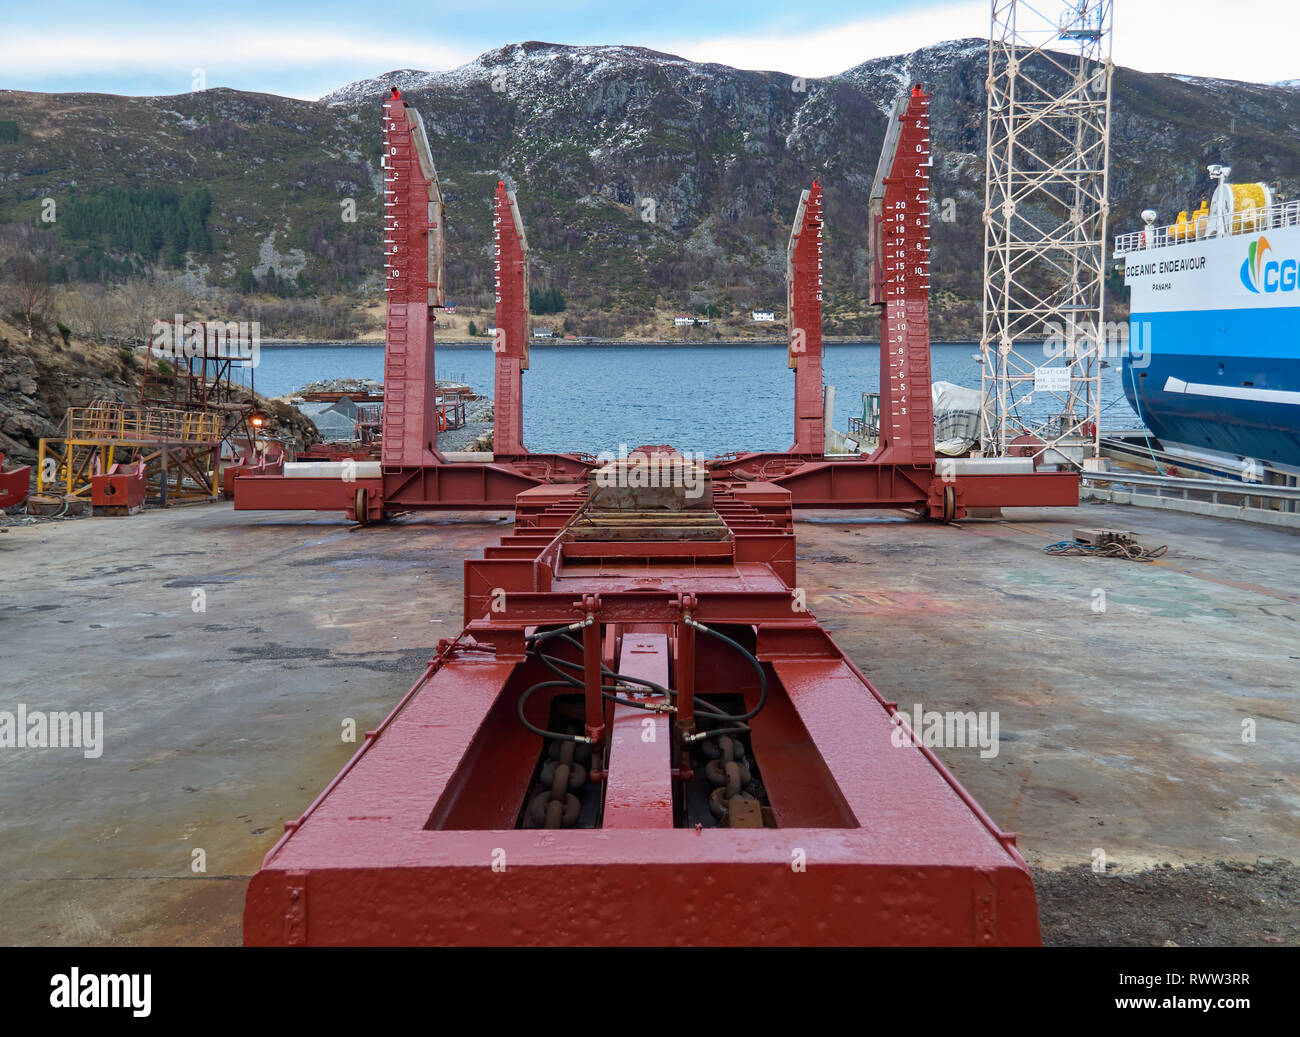 A Ships Carriageway at the Batbygg Shipyard in Norway, used to haul Vessels out of the water so that they can be worked on. Maloy, Norway. Stock Photo